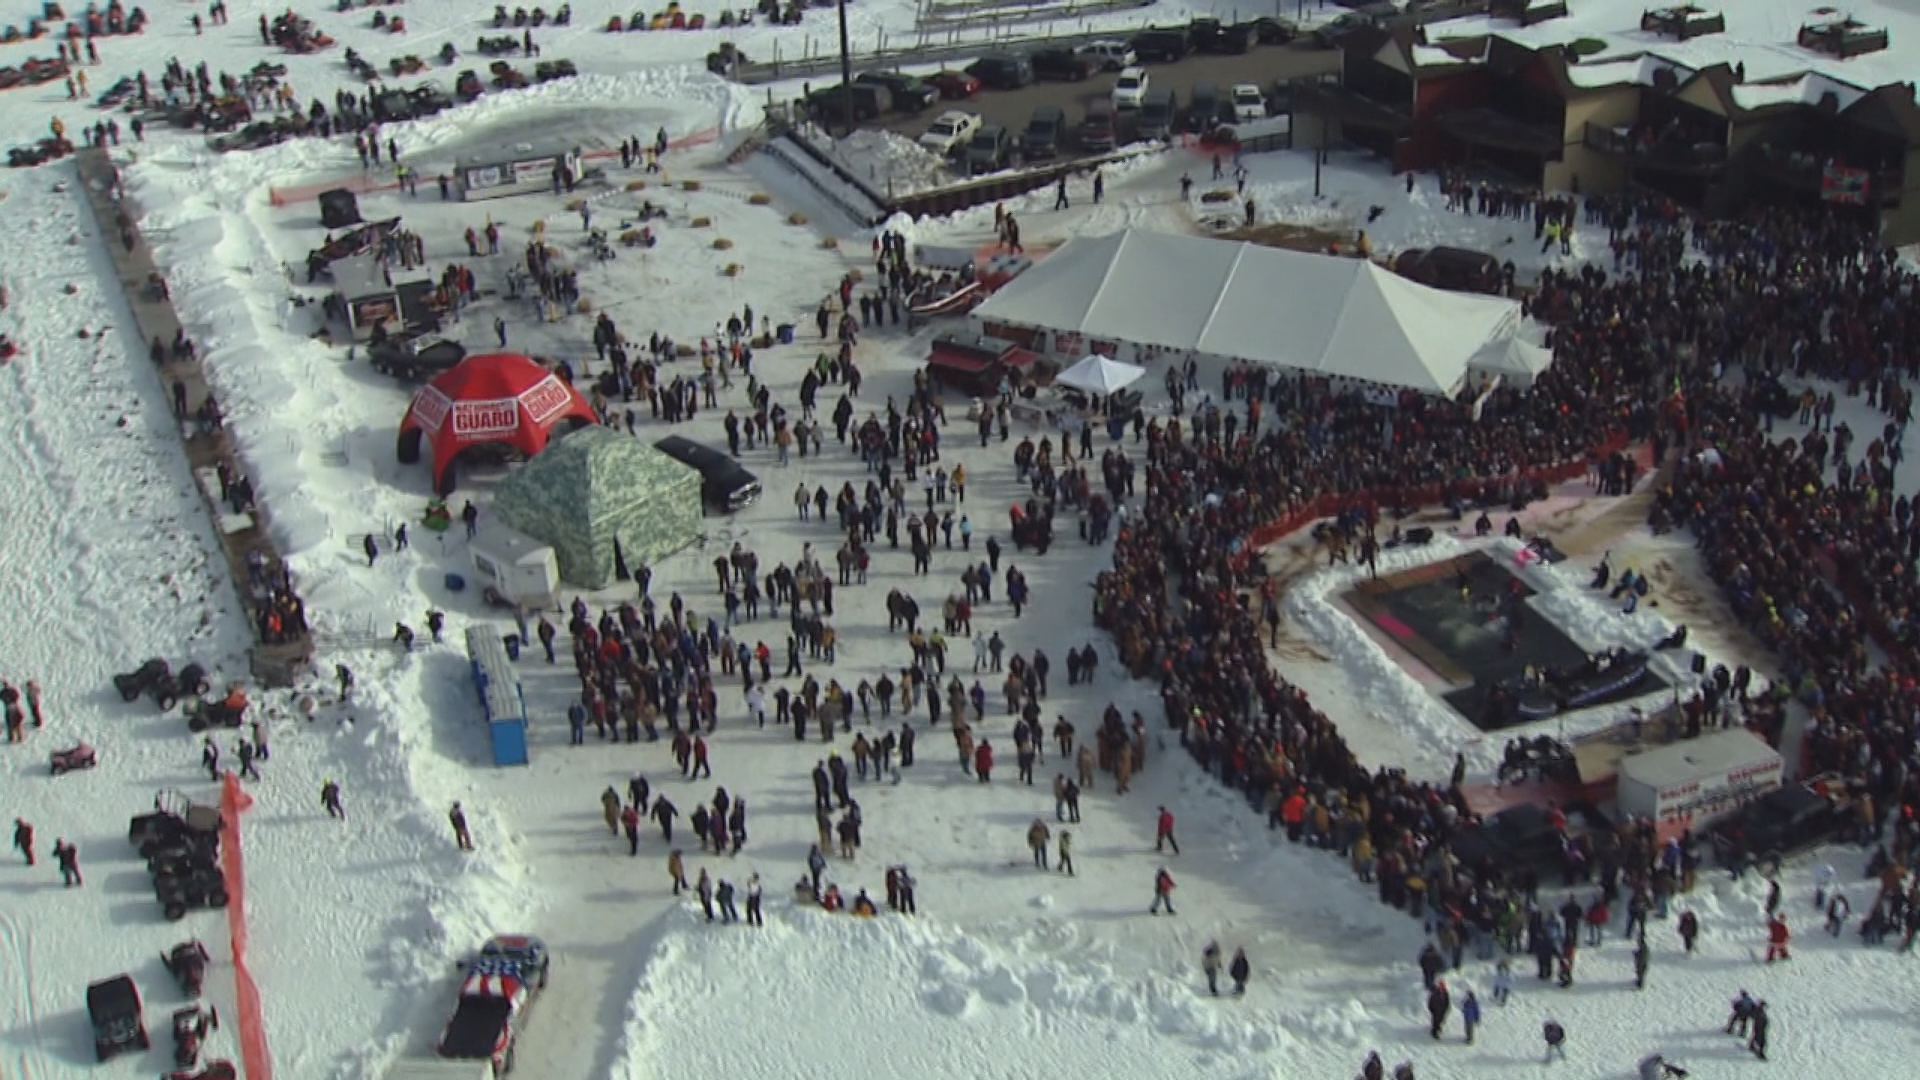 Ice conditions force changes at Eelpout festival